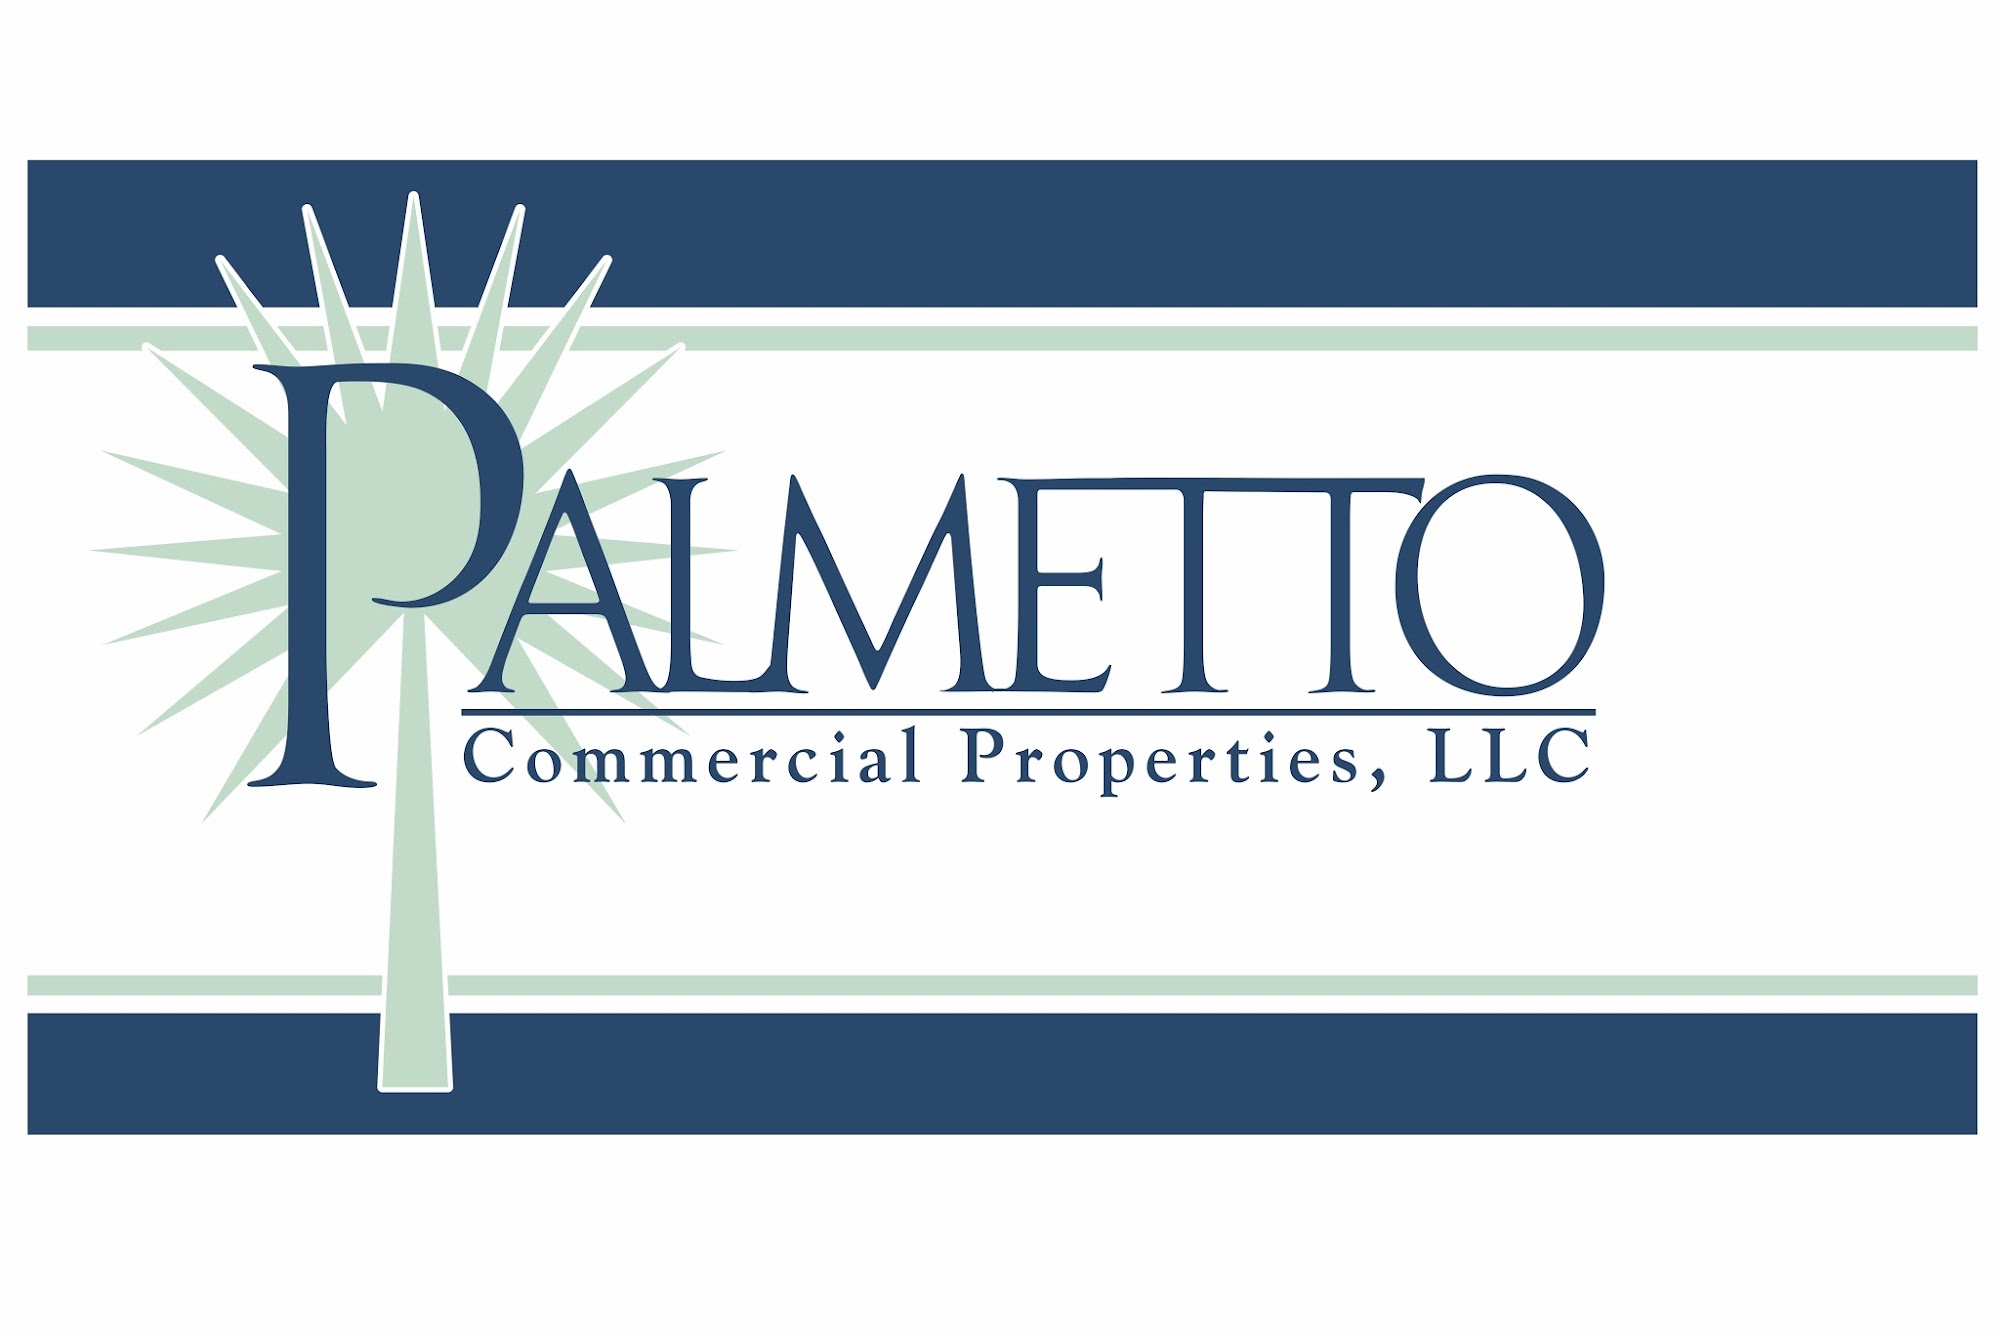 Palmetto Commercial Properties, LLC